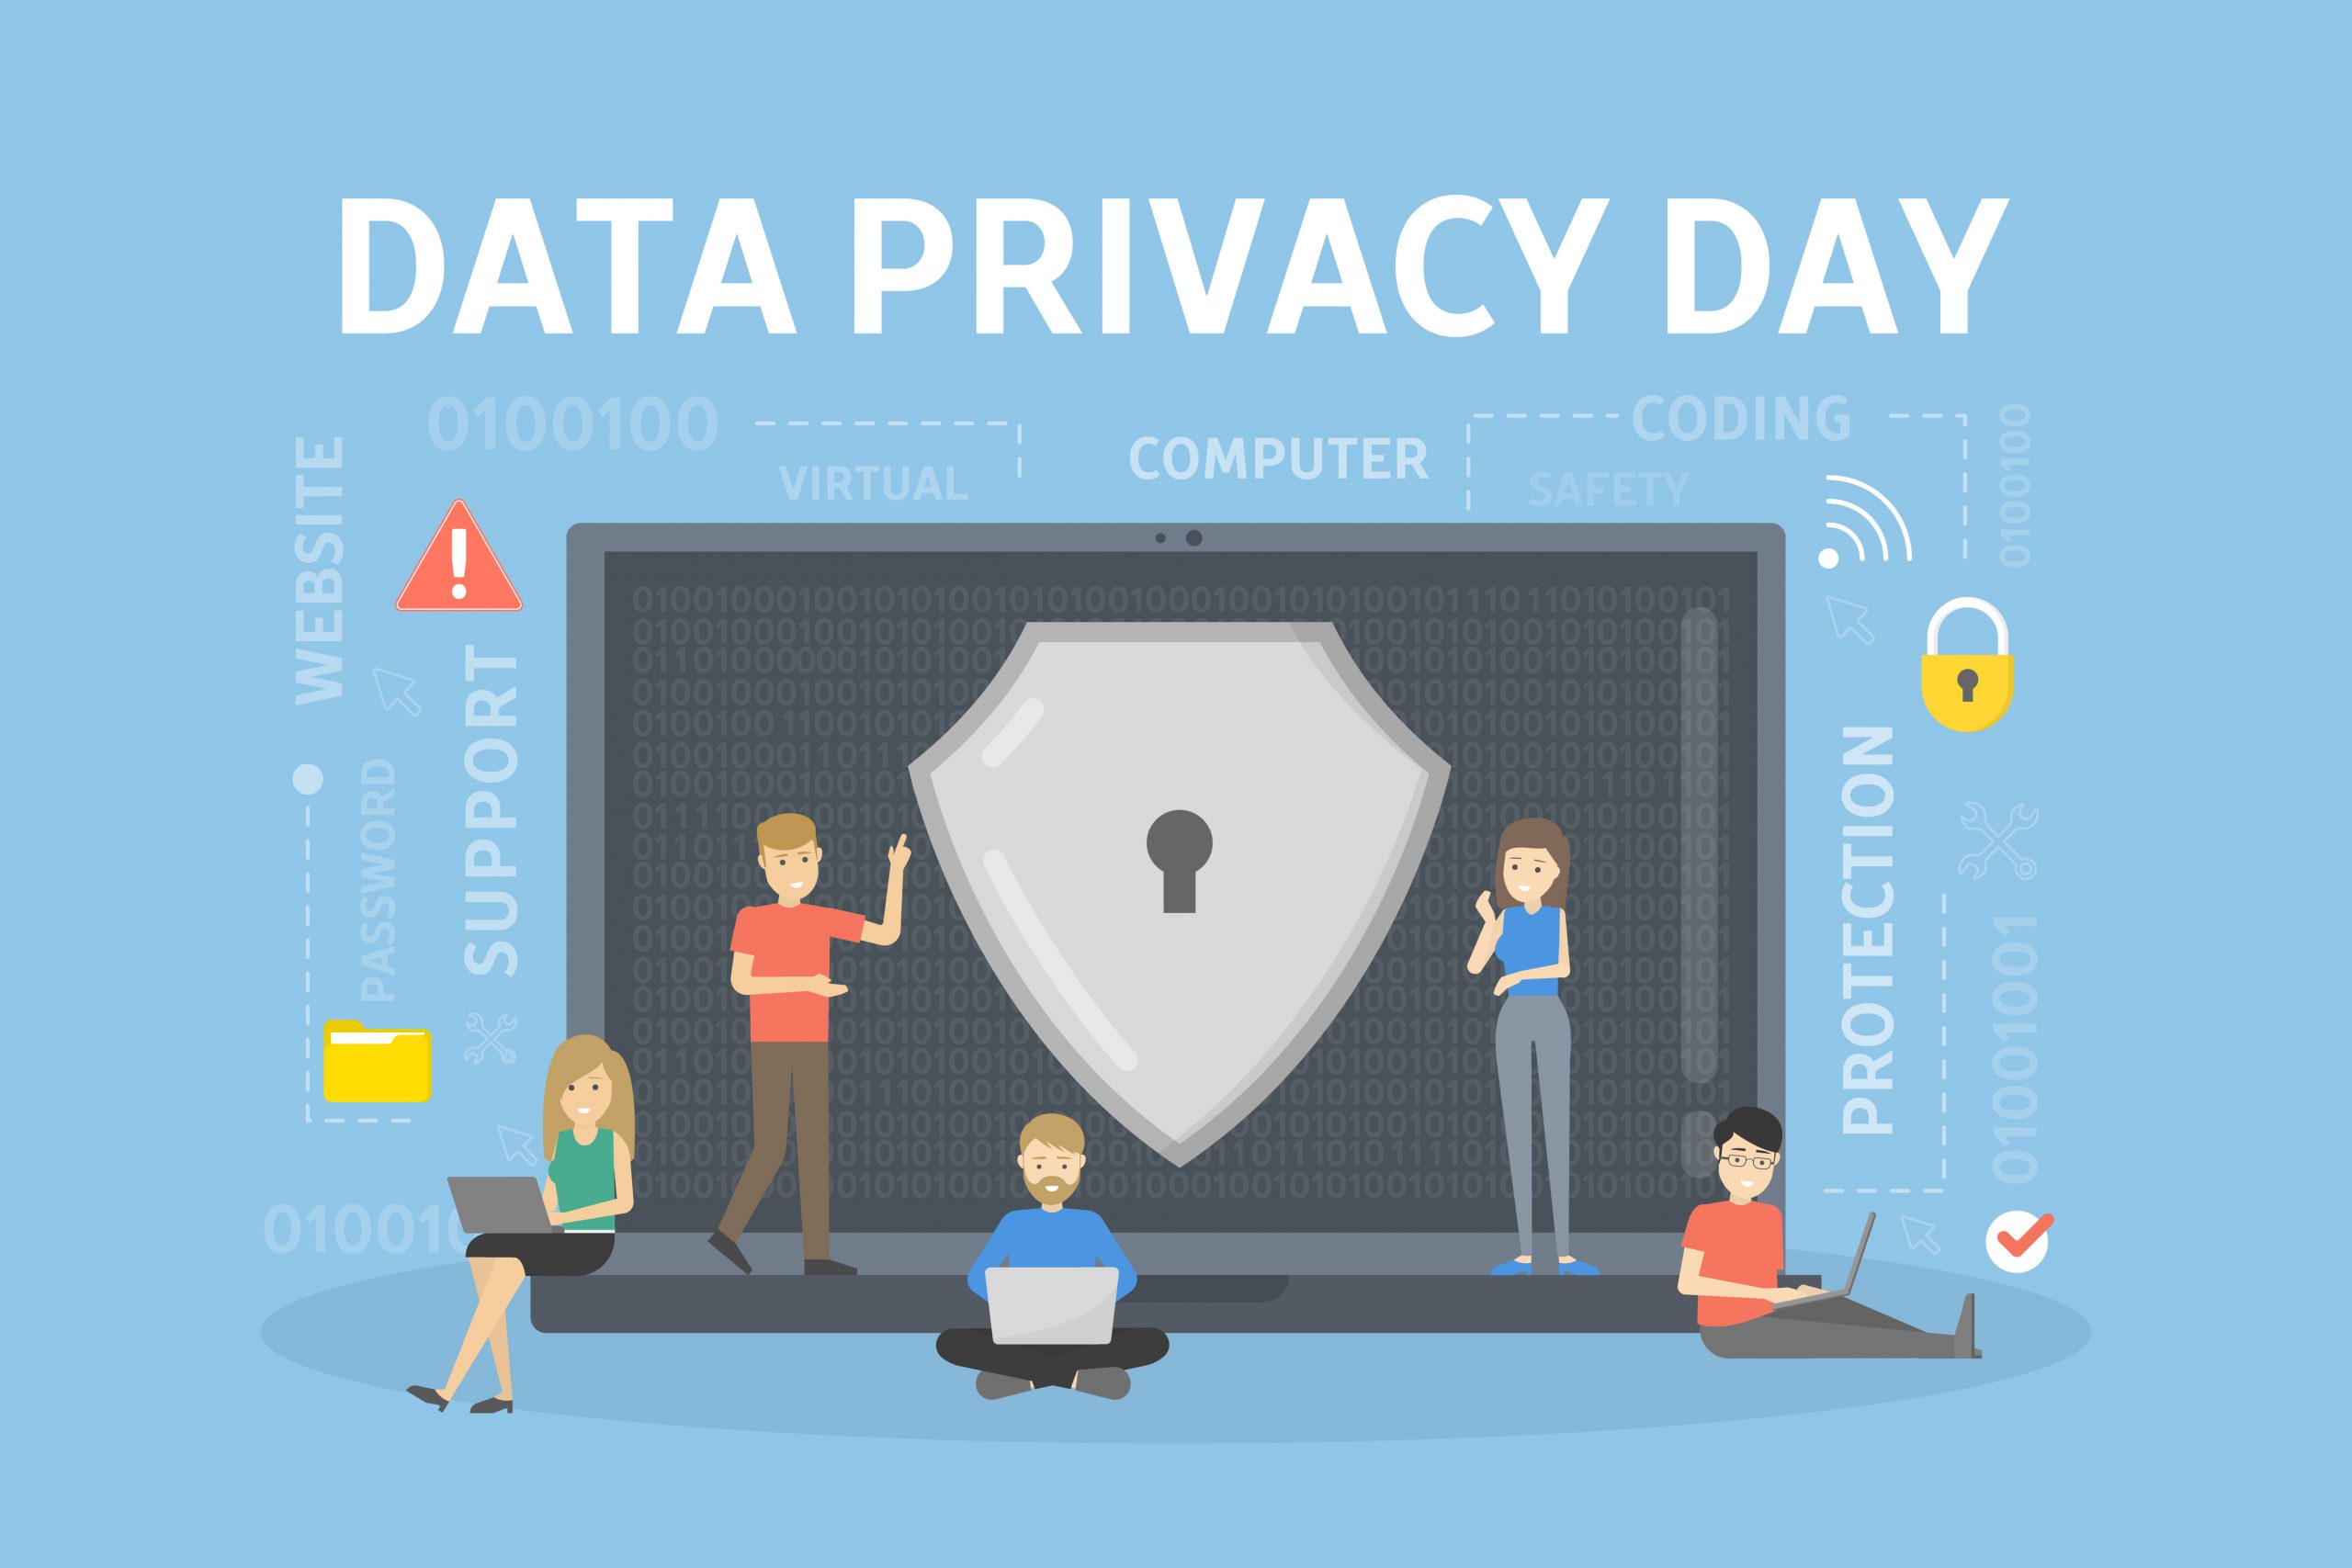 A blue image with an illustration of small people walking around over a computer with a lock on it promoting Data Privacy Day. Image licensed through Adobe Stock.